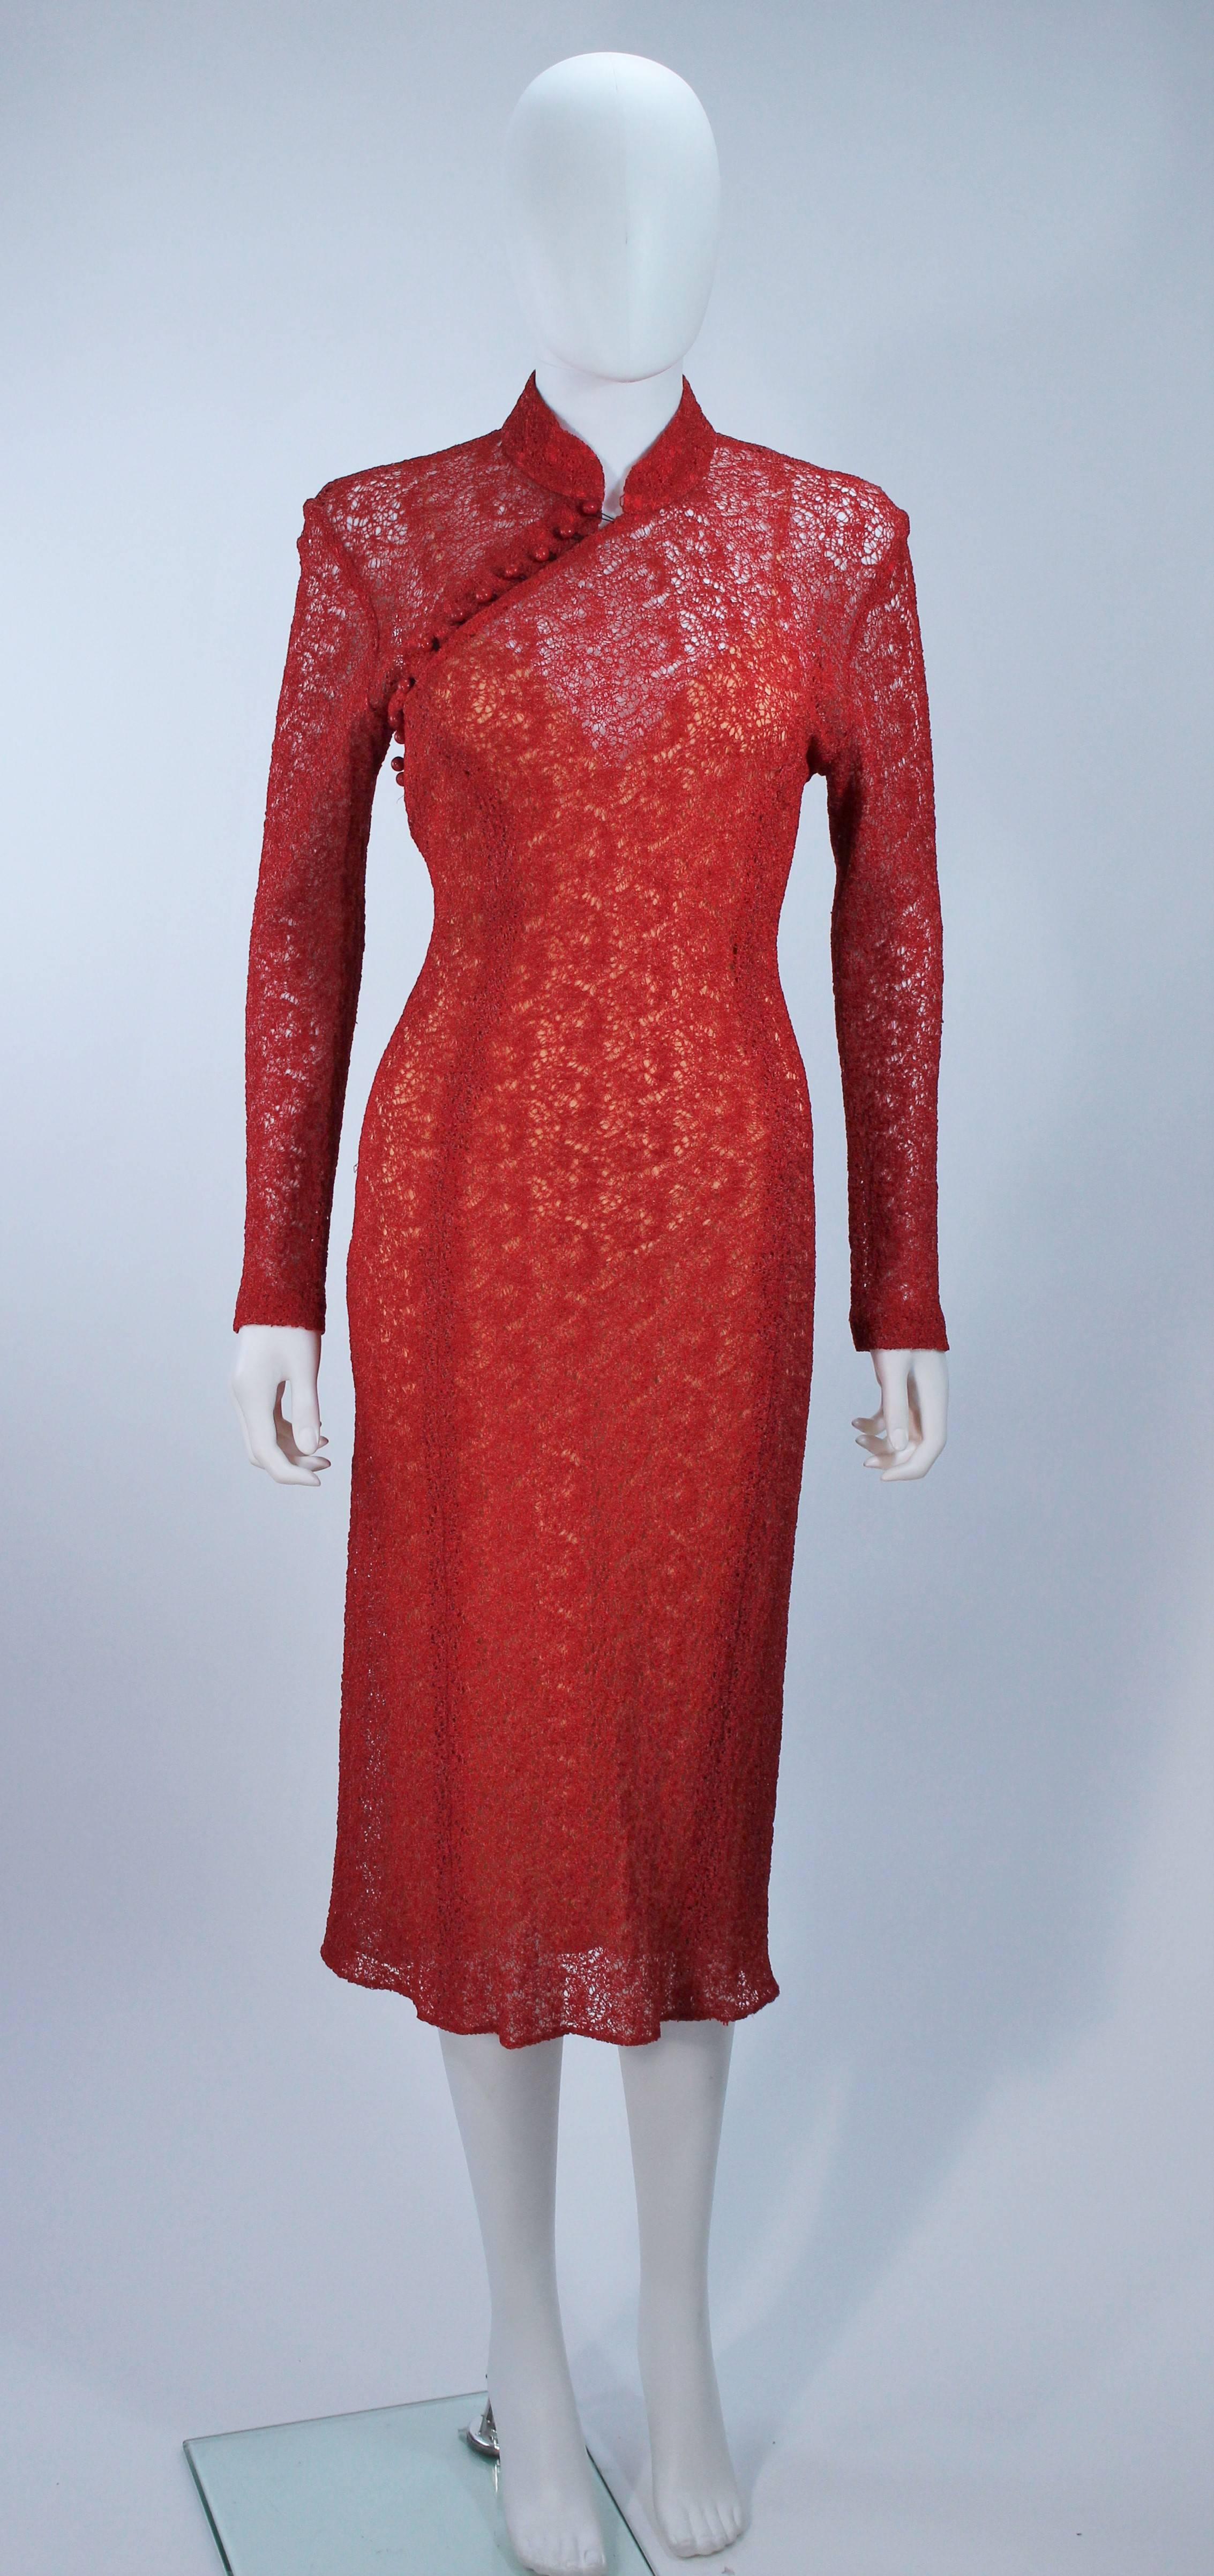  This Monique Lhuillier cocktail dress is composed of a stretch sheer lace material and stretch bias cut silk slip. There is a side zipper closure with buttons at the neck. In excellent vintage condition. 

  **Please cross-reference measurements